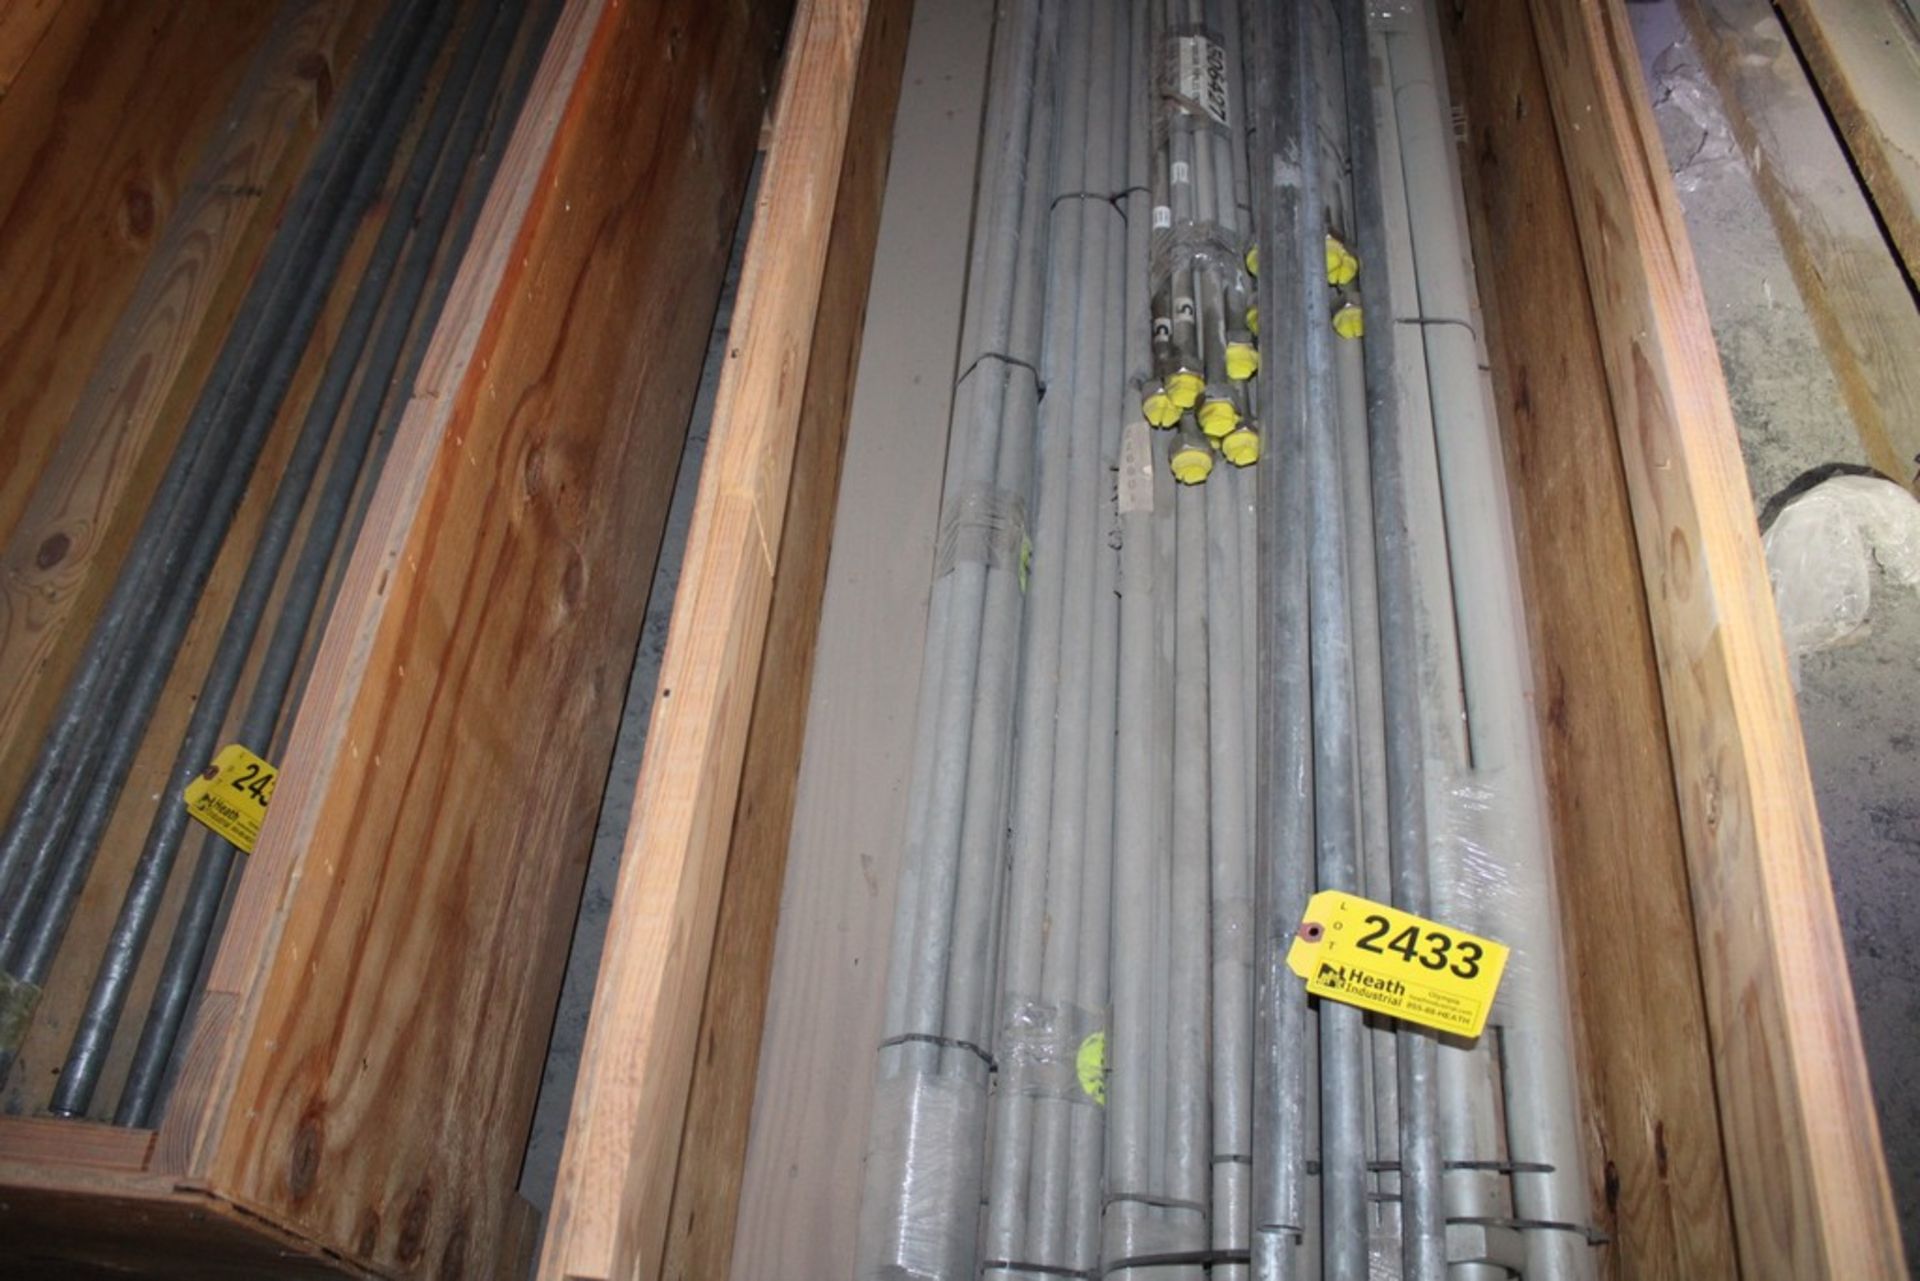 LARGE QUANTITY OF HYDRAULIC/STEEL TUBING IN CRATE - Image 2 of 2